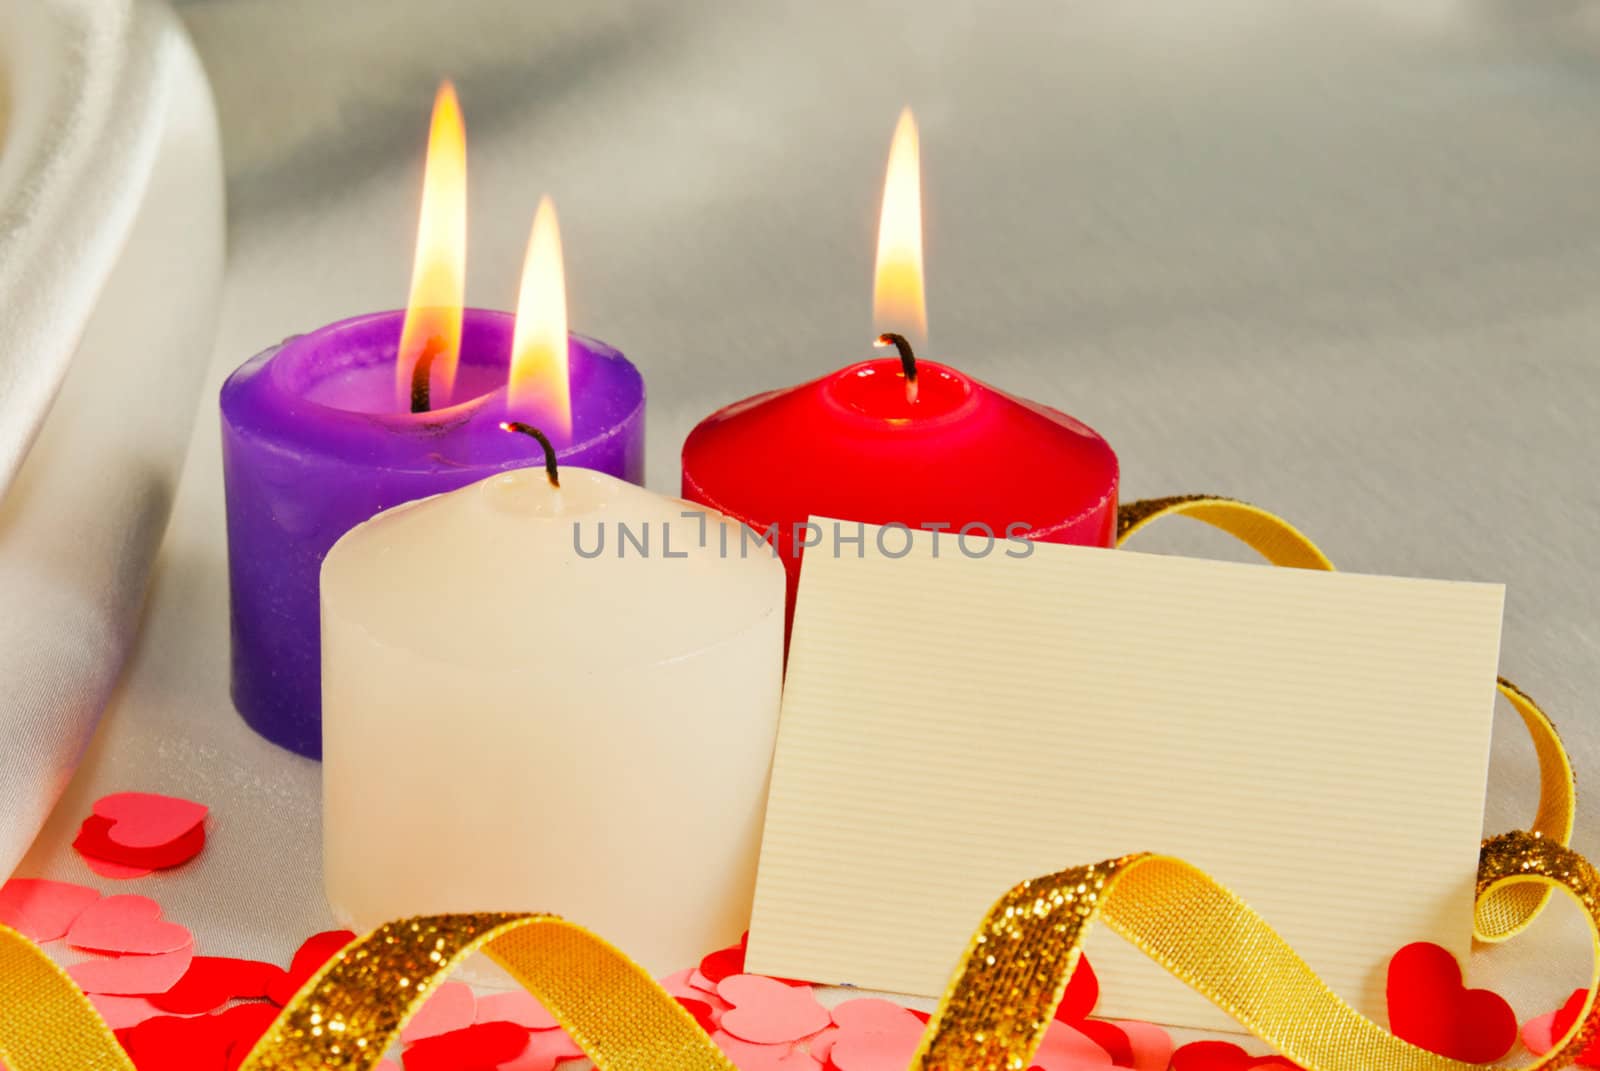 Three burning candles over light background